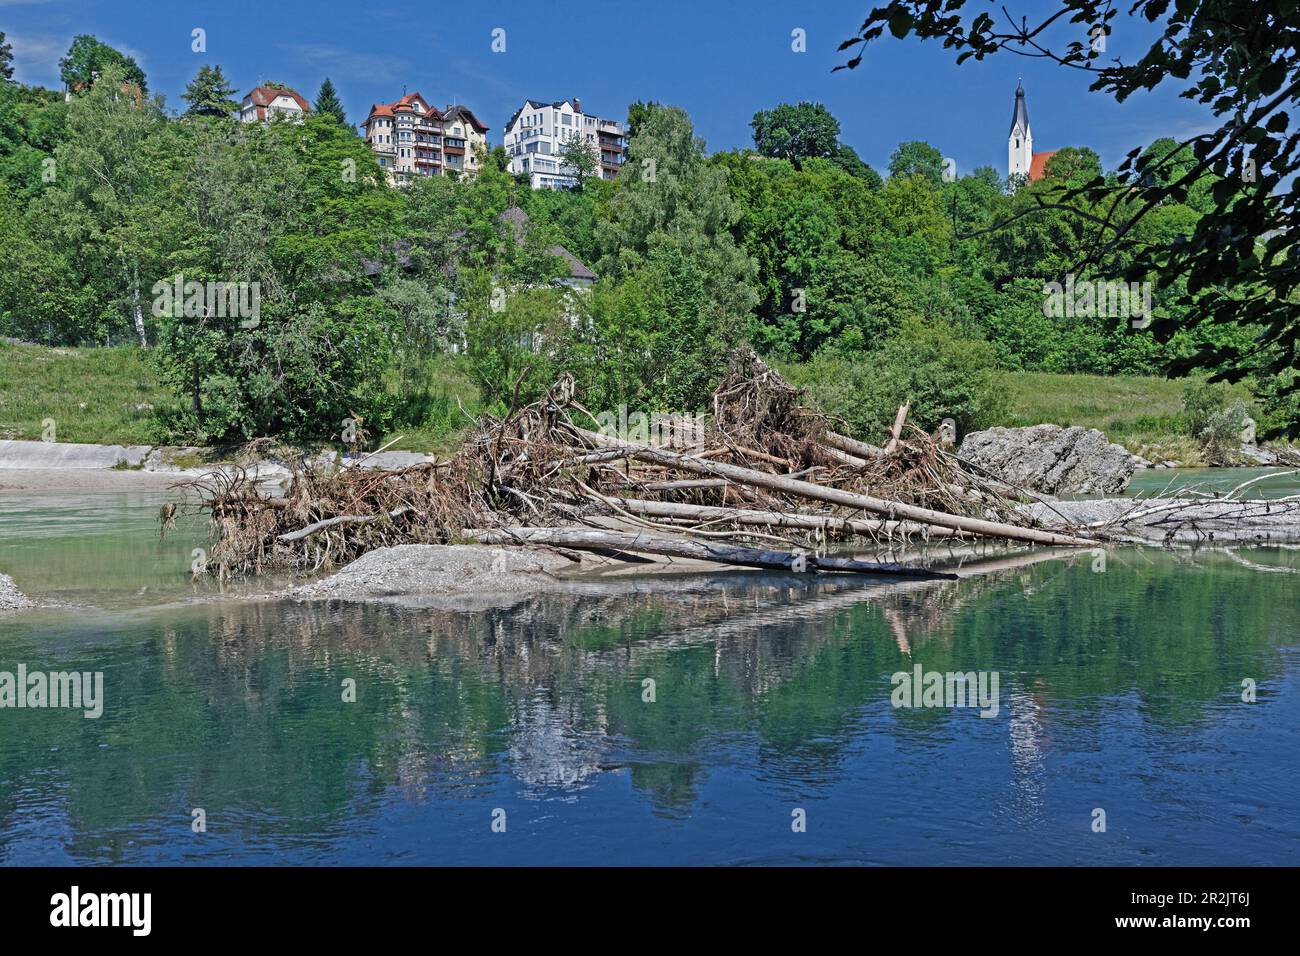 Piles of driftwood on the river Isar, Pullach, Munich, Upper Bavaria, Bavaria, Germany Stock Photo